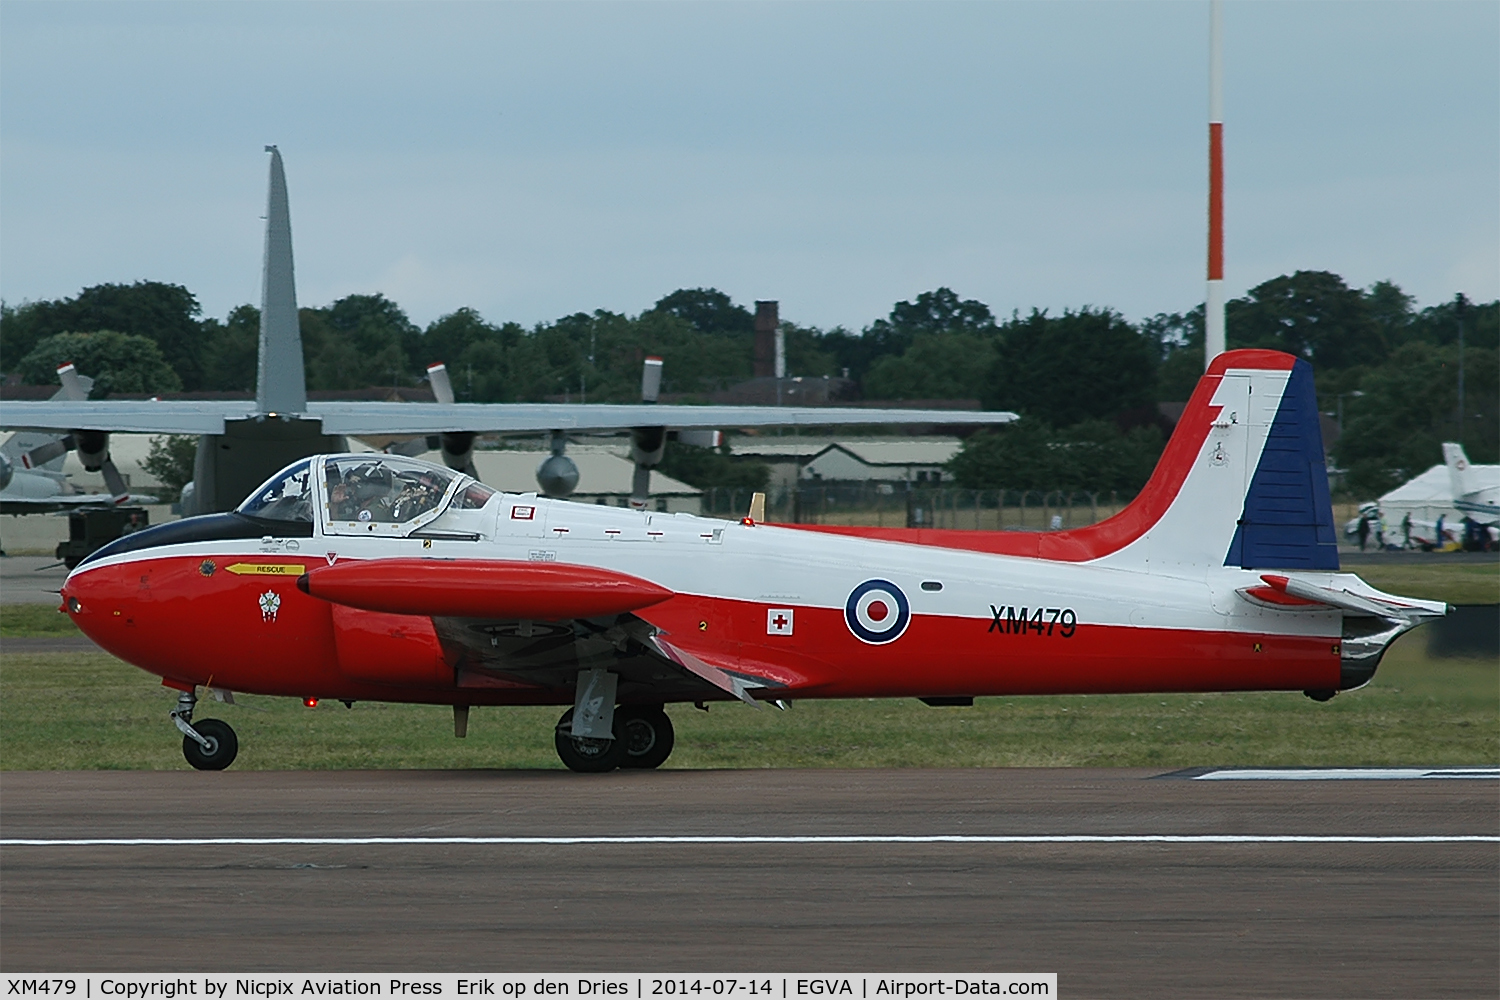 XM479, 1960 Hunting P-84 Jet Provost T.3A C/N PAC/W/9287, XM-479 is civil owned and painted in a military look-alike scheme